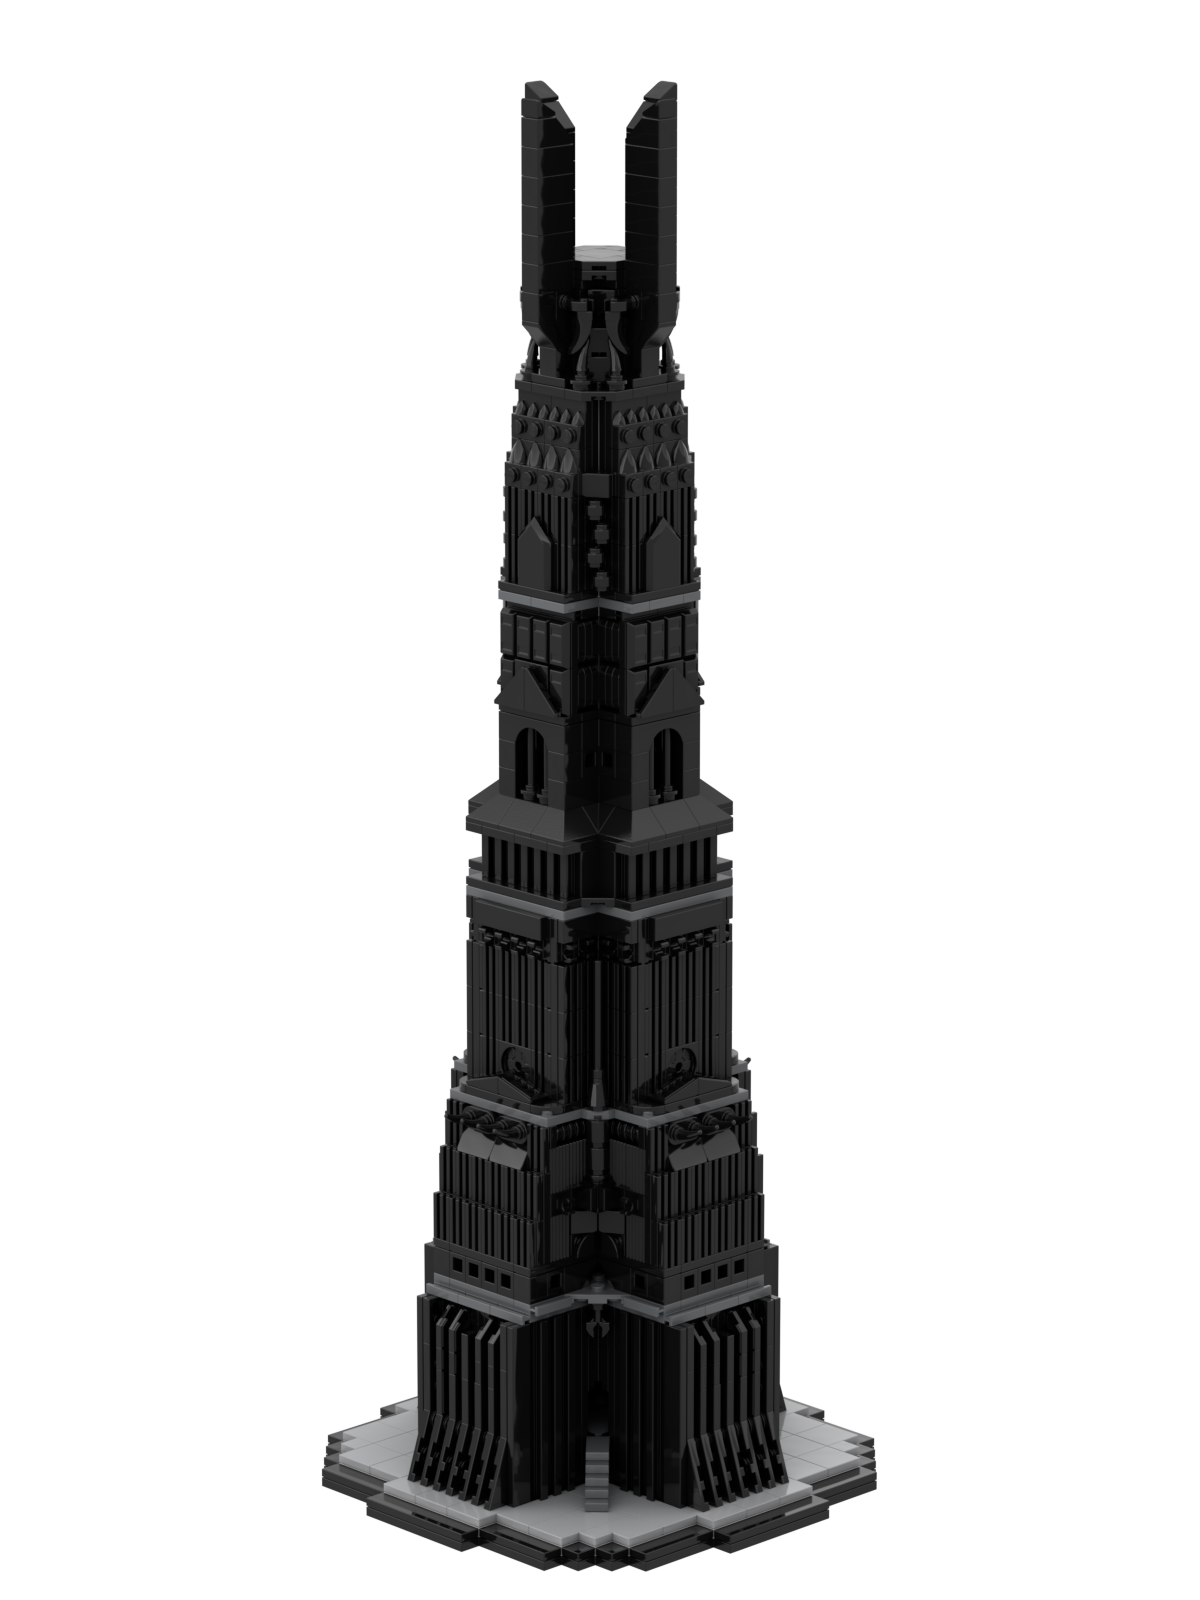 The Lord of the Rings UCS Orthanc MOC-72337 Movie With 1950 Pieces